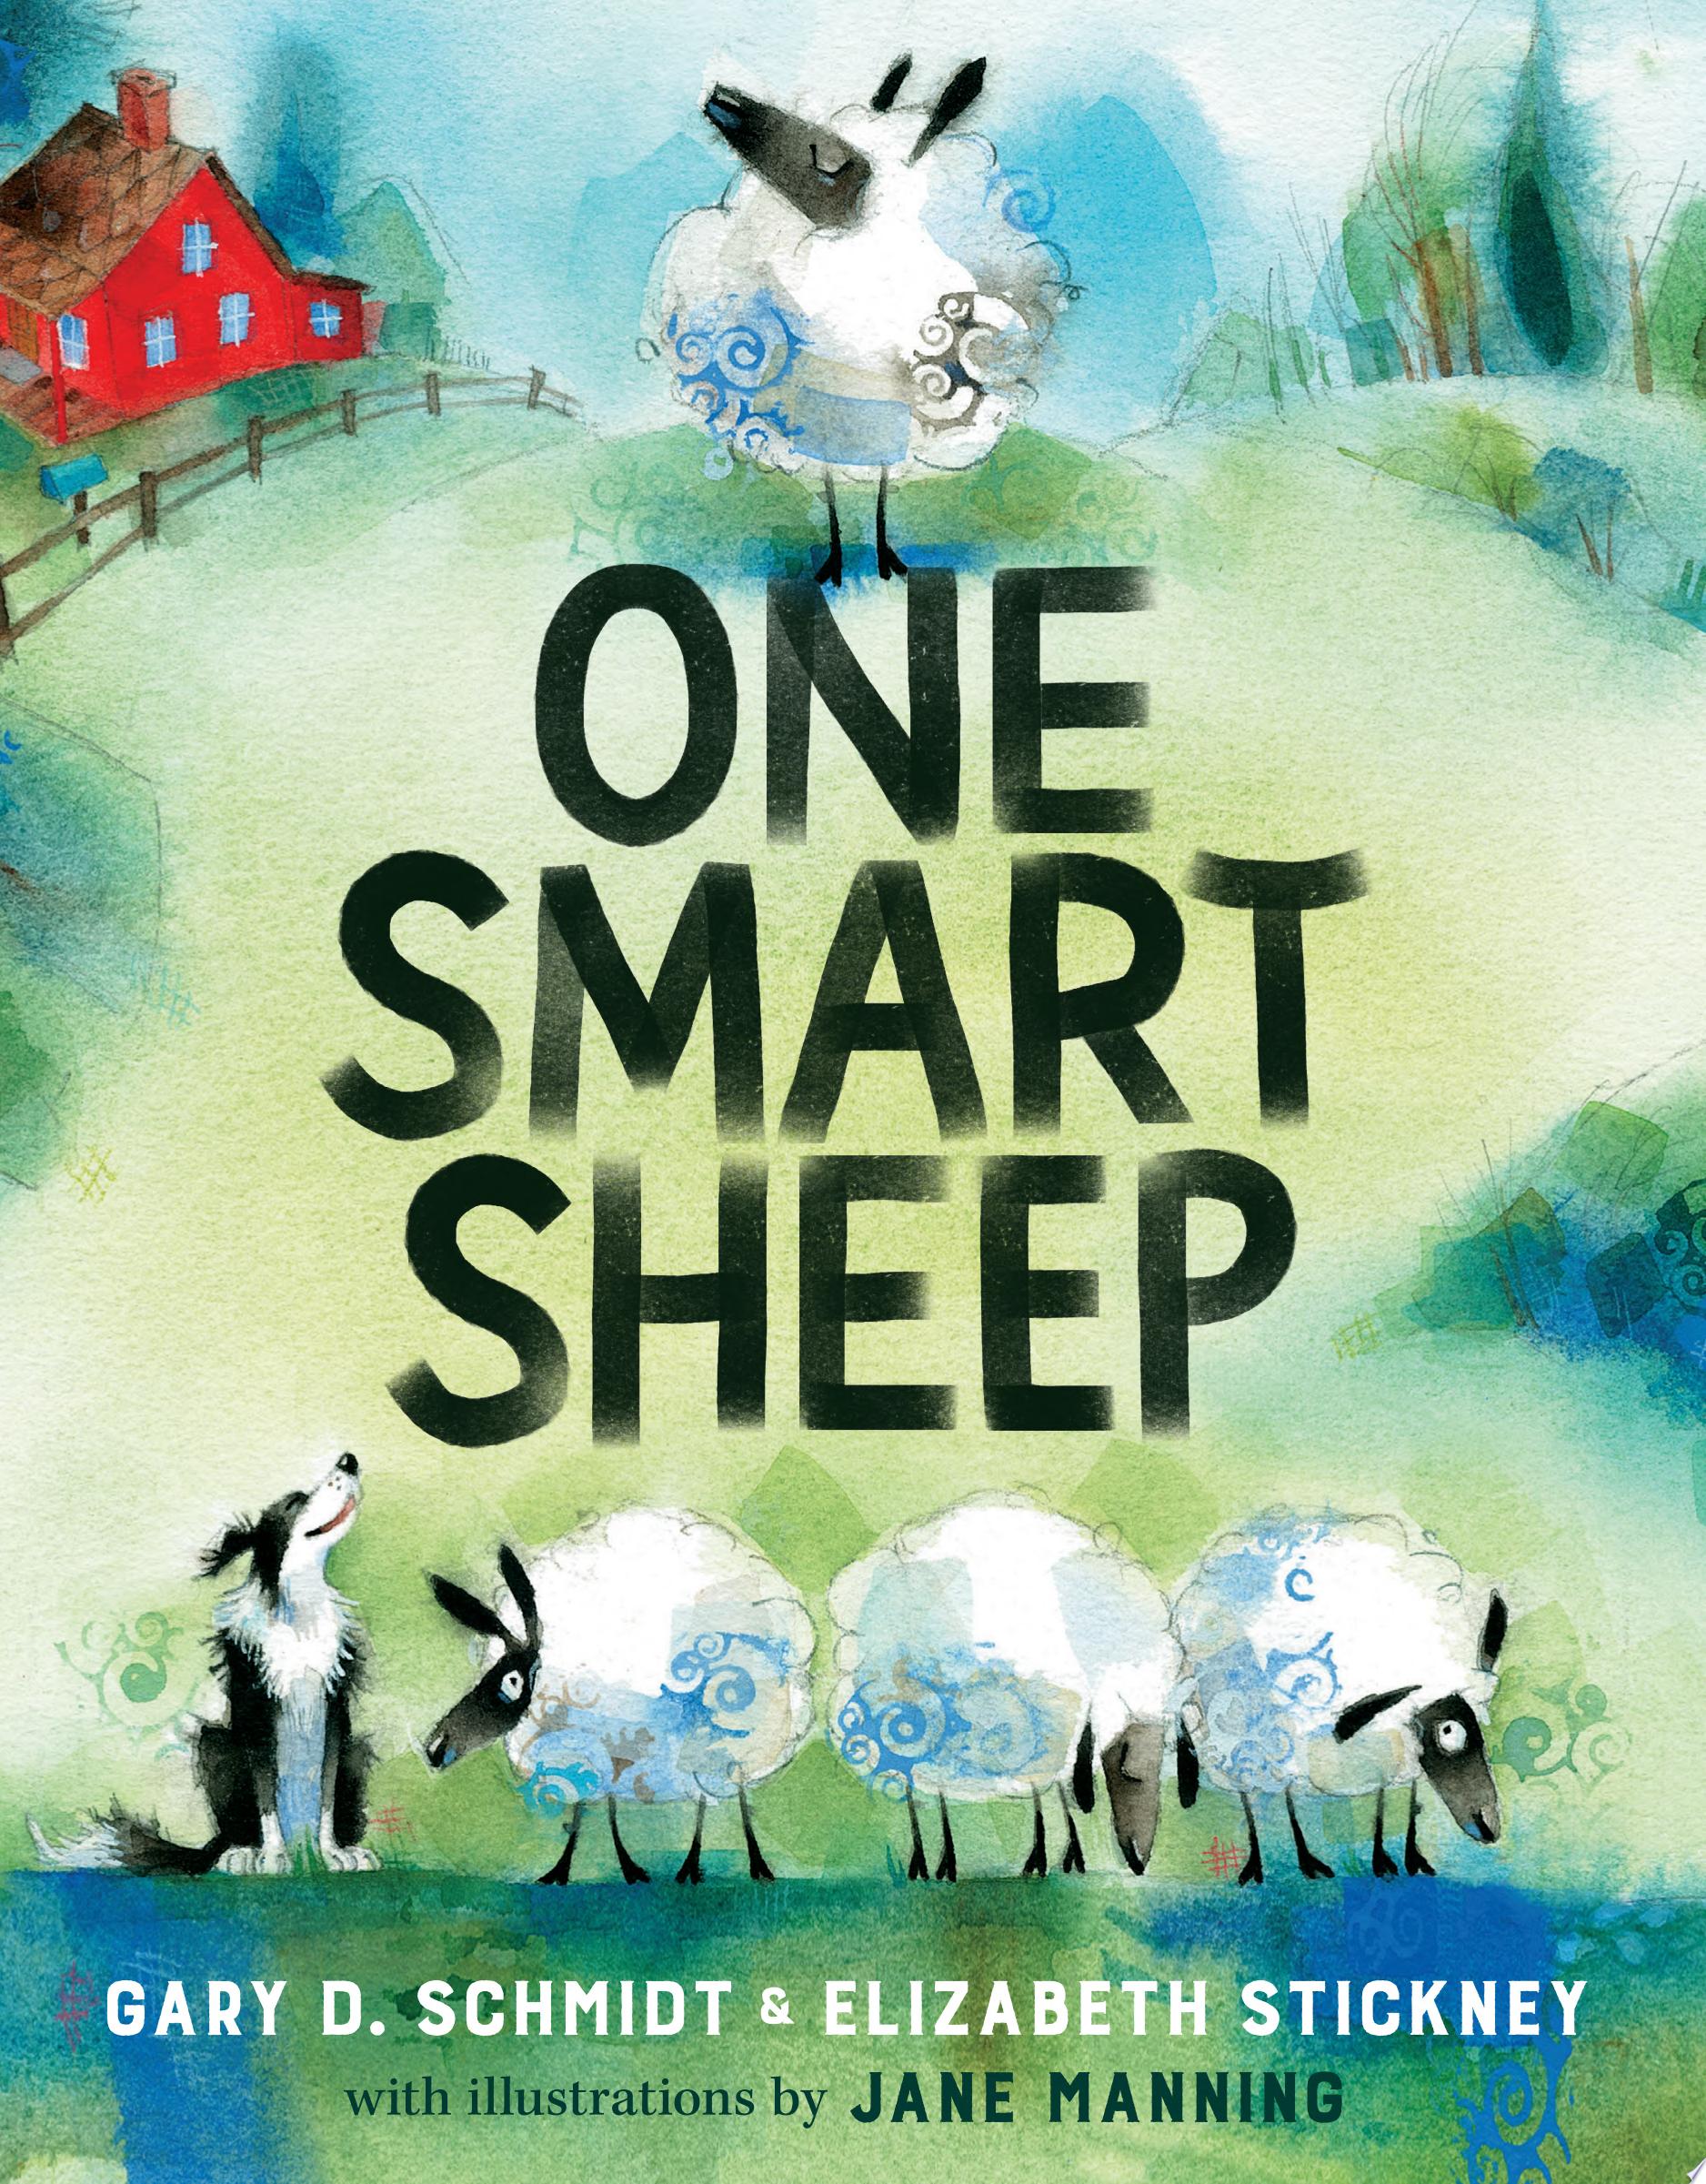 Image for "One Smart Sheep"